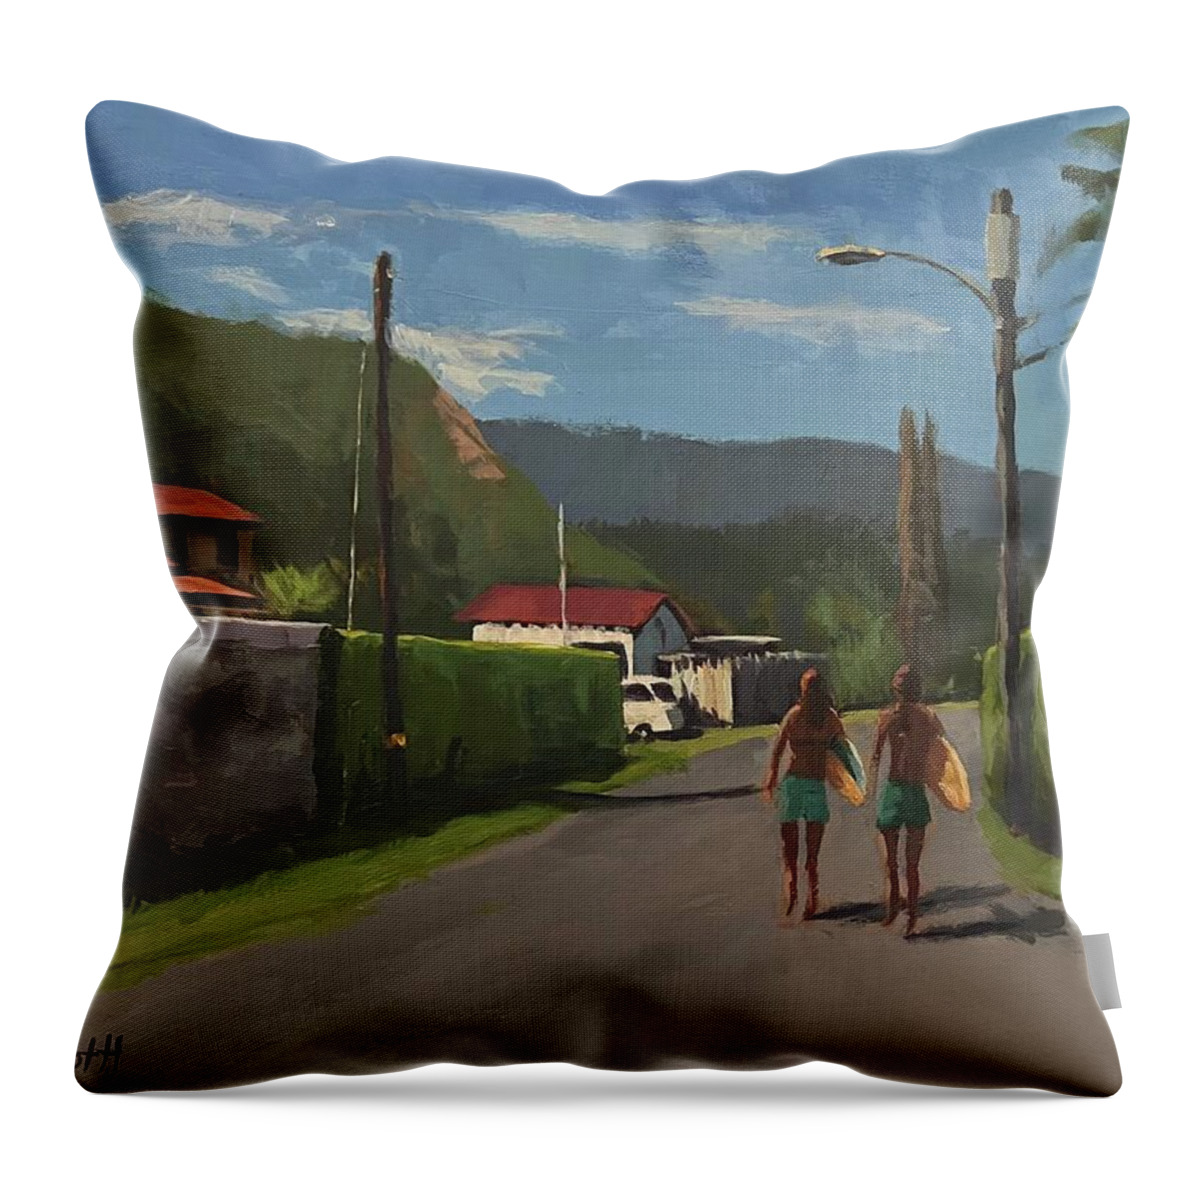 Surfers Throw Pillow featuring the painting Surfer Girls by Laura Toth